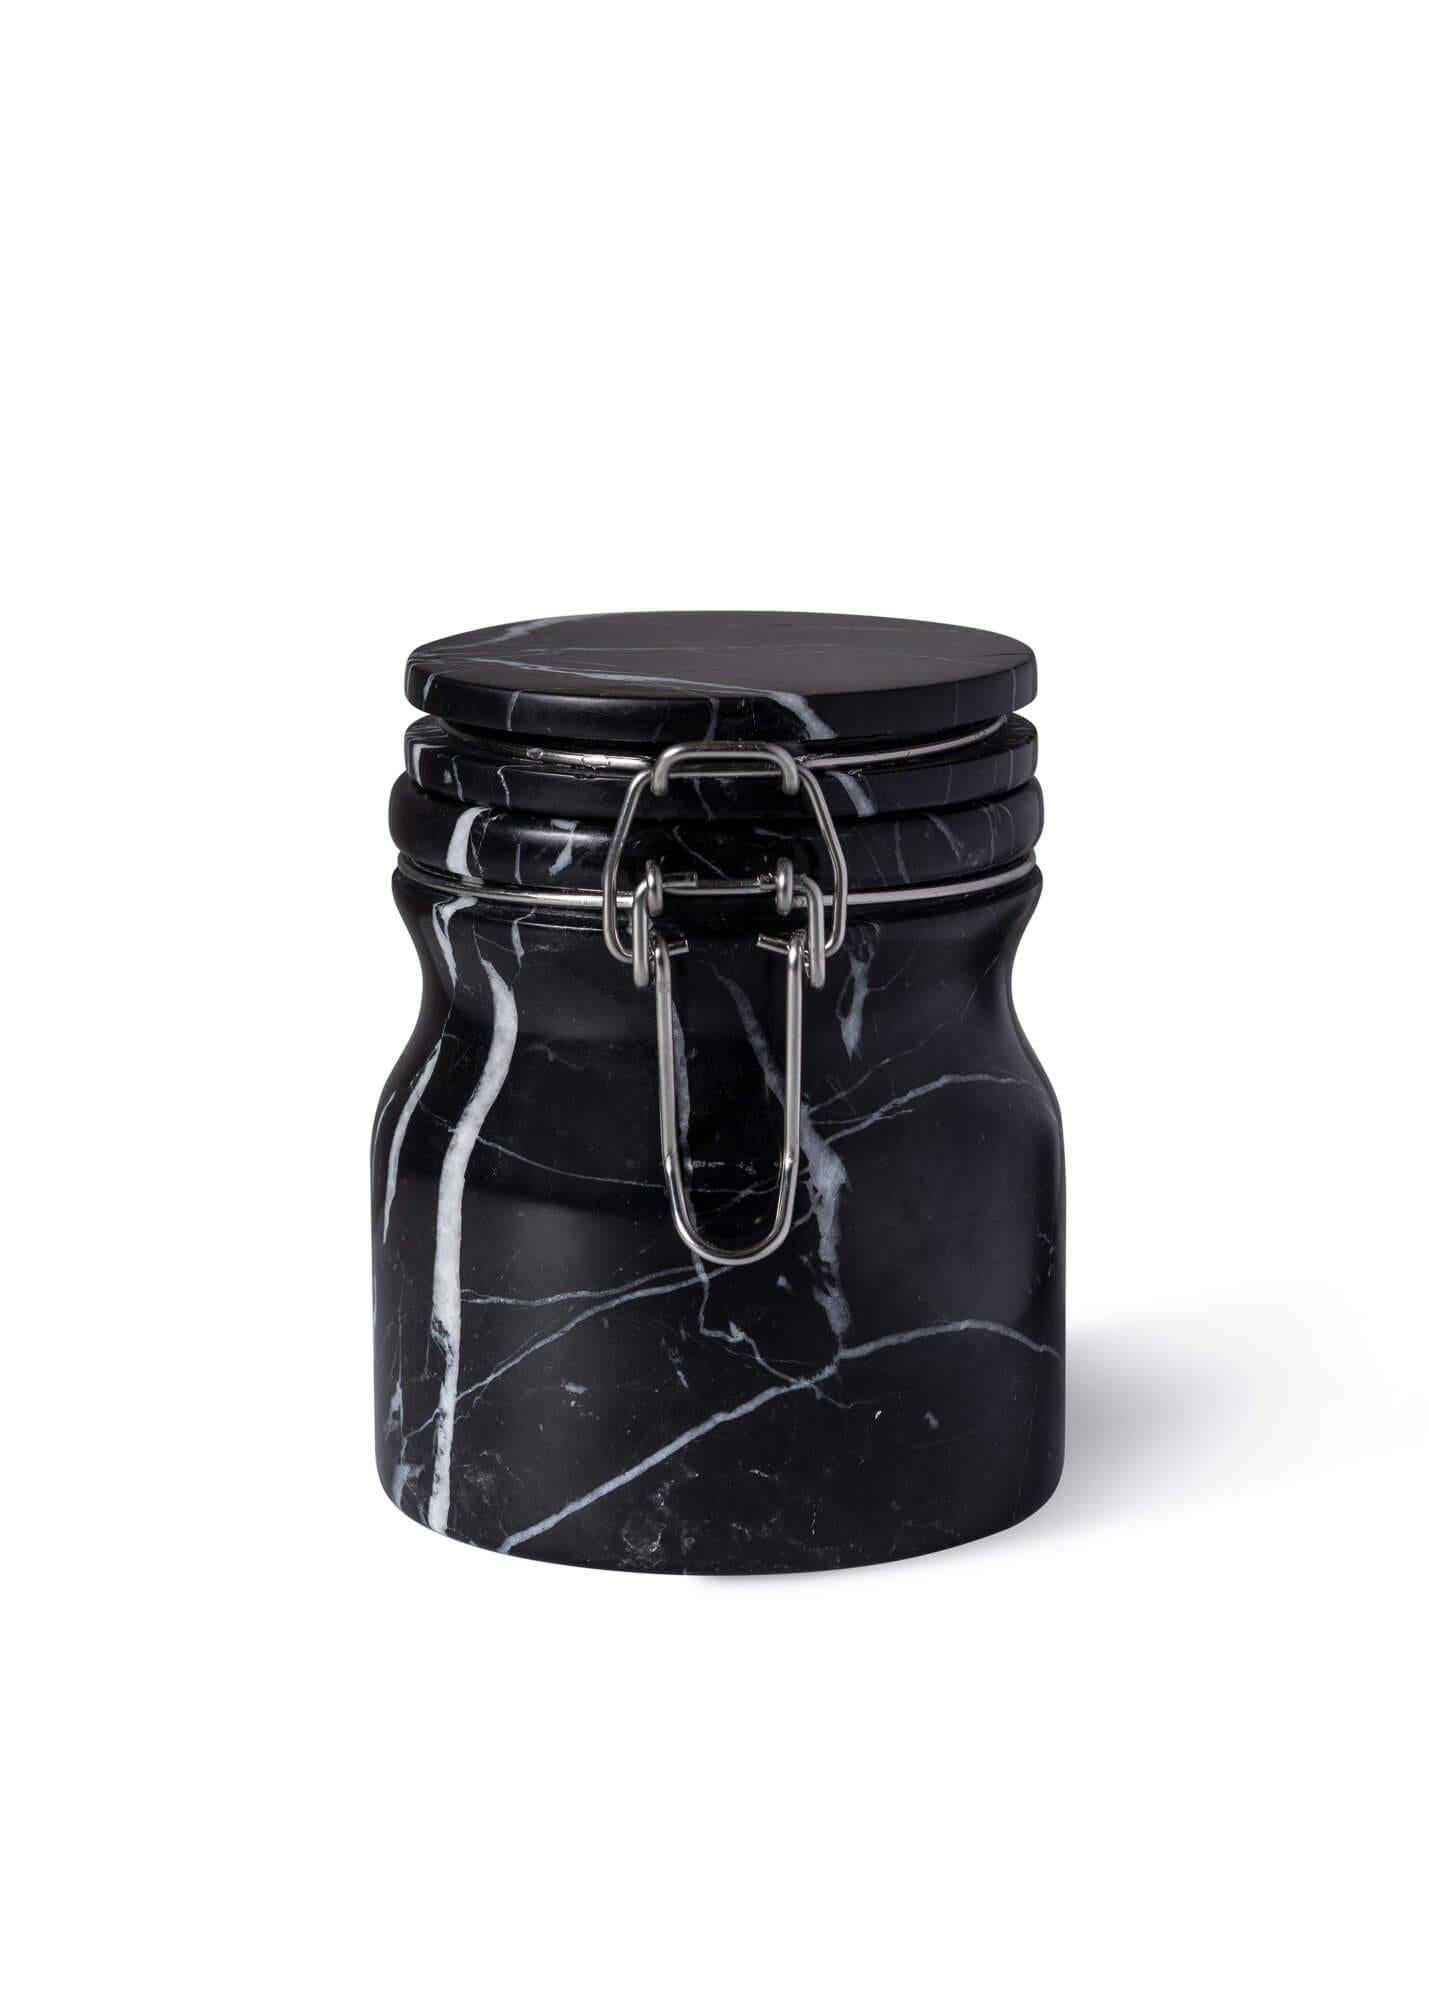 The Marblelous Jar is a handcrafted marble container inspired by traditional marmalade jars. Featuring a chromed latch for added contemporary flair, it is both beautiful to use and admire. Available in three colour variations - Green Guatemala,